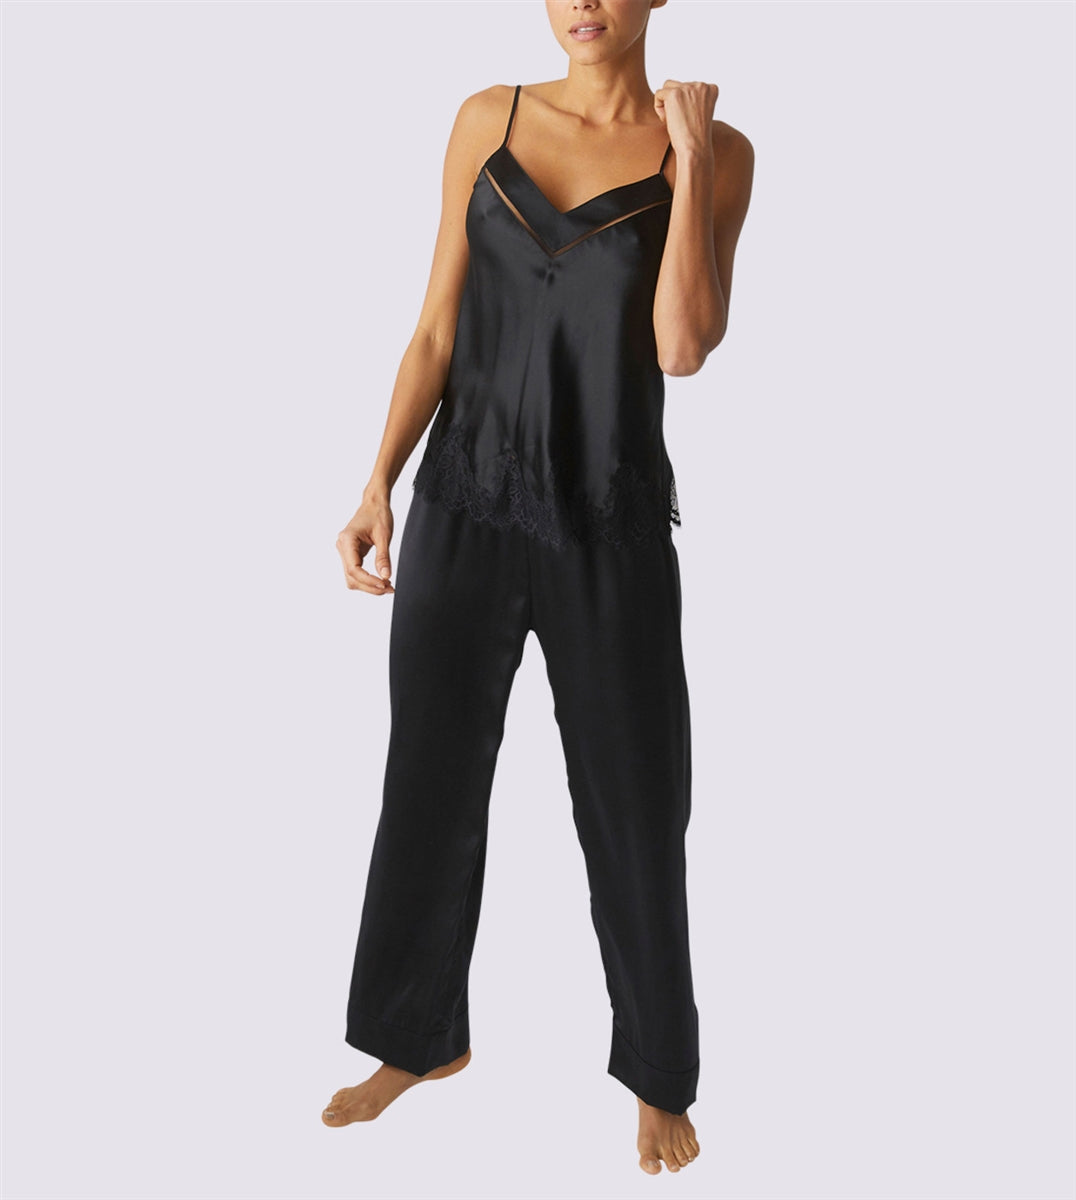 Black Silk Night Pant boasting a soft, comfortable and luxurious fit.